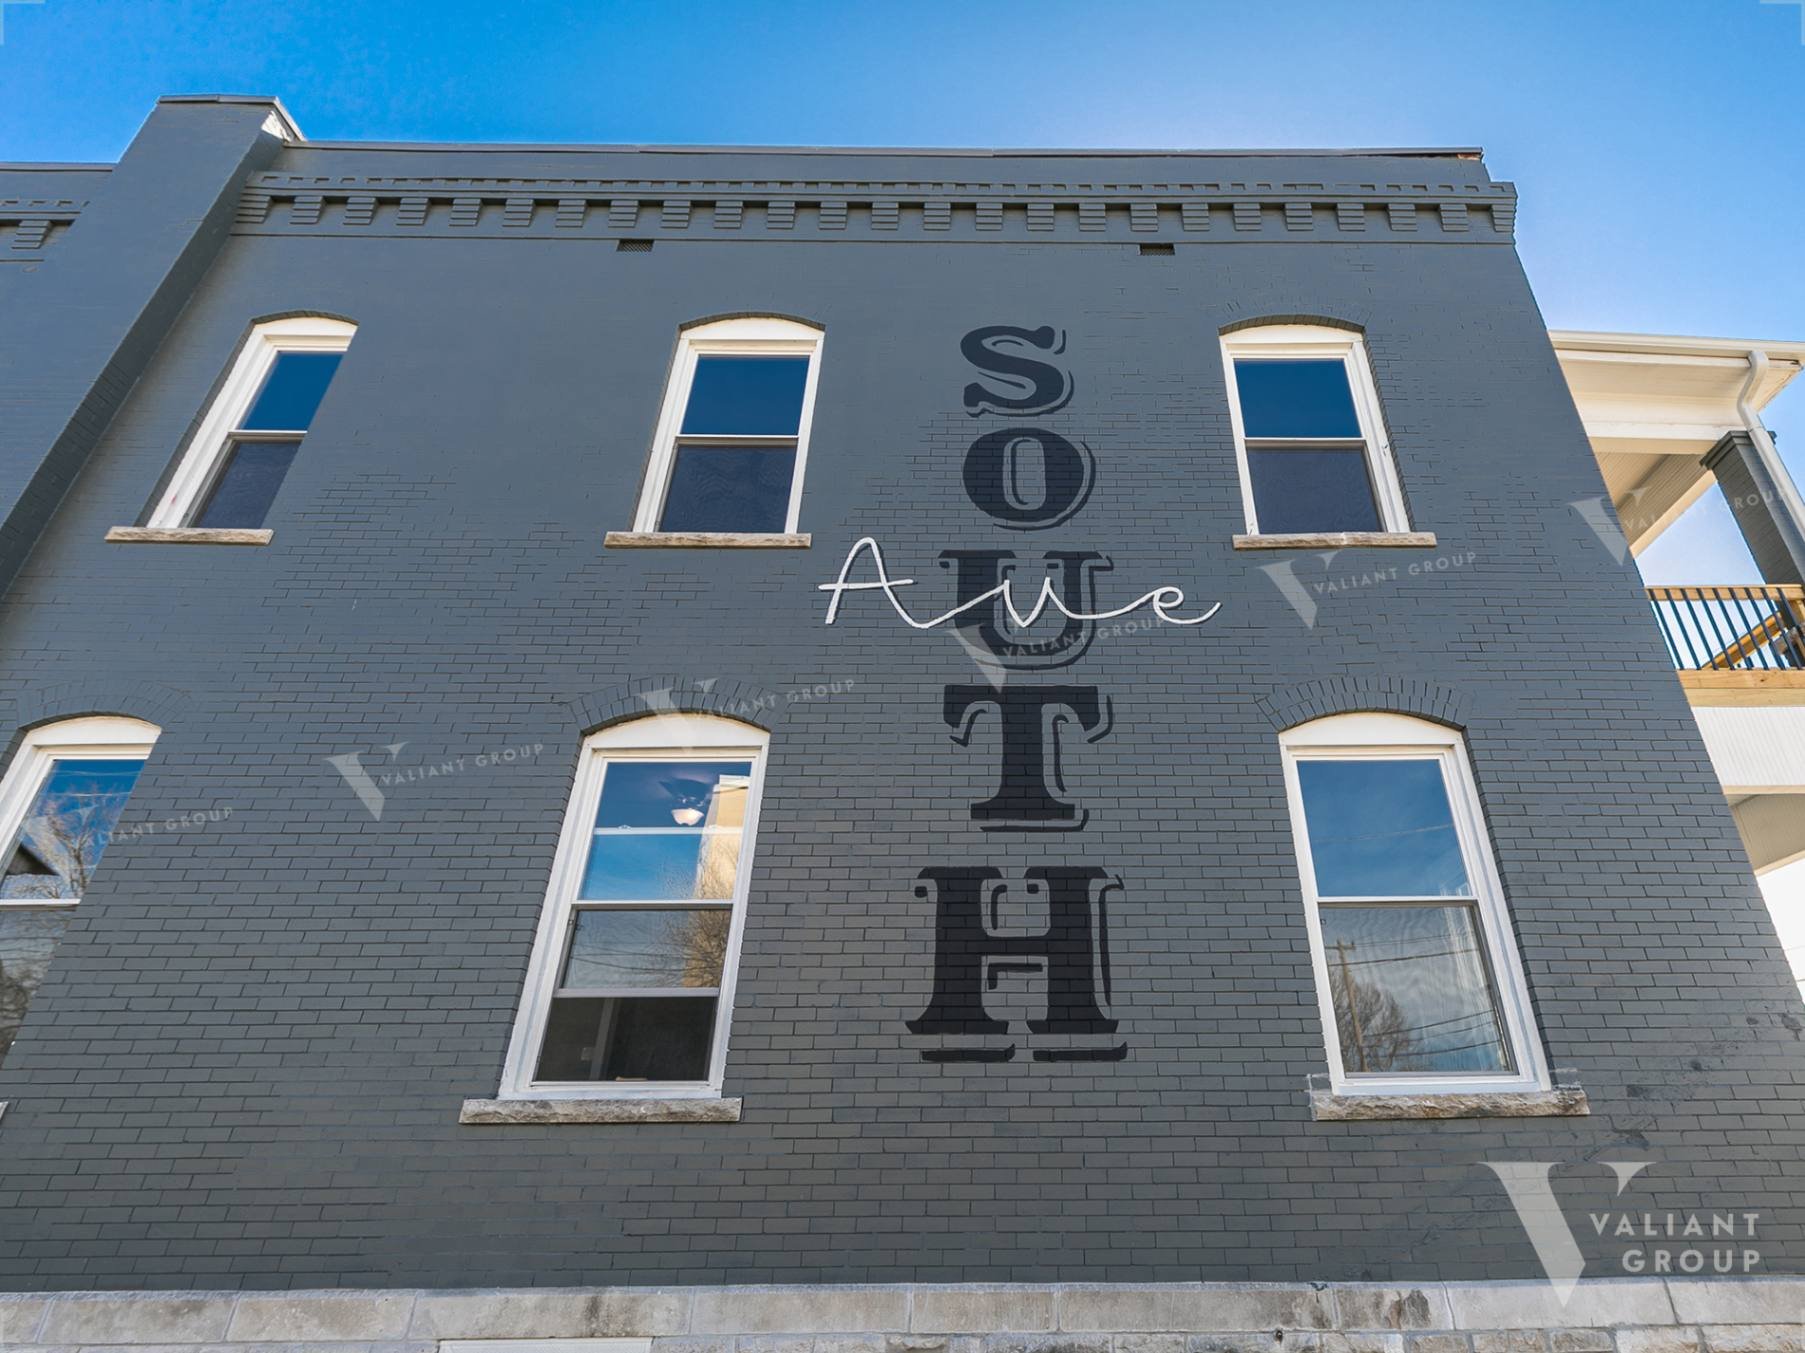 806-South-Ave-Springfield-MO-Downtown-Exterior-Painted-Sign.jpg